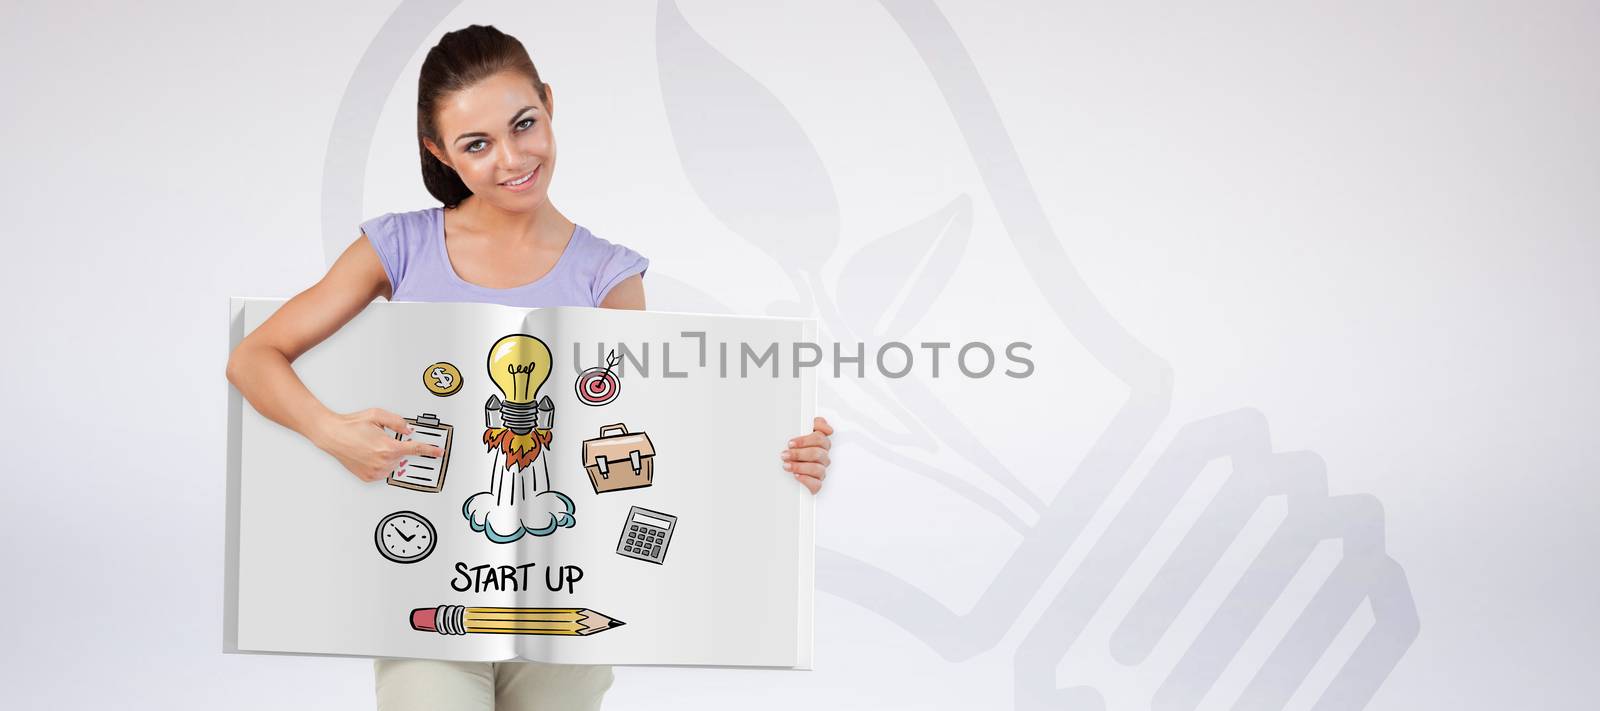 Pretty woman showing a book against grey background